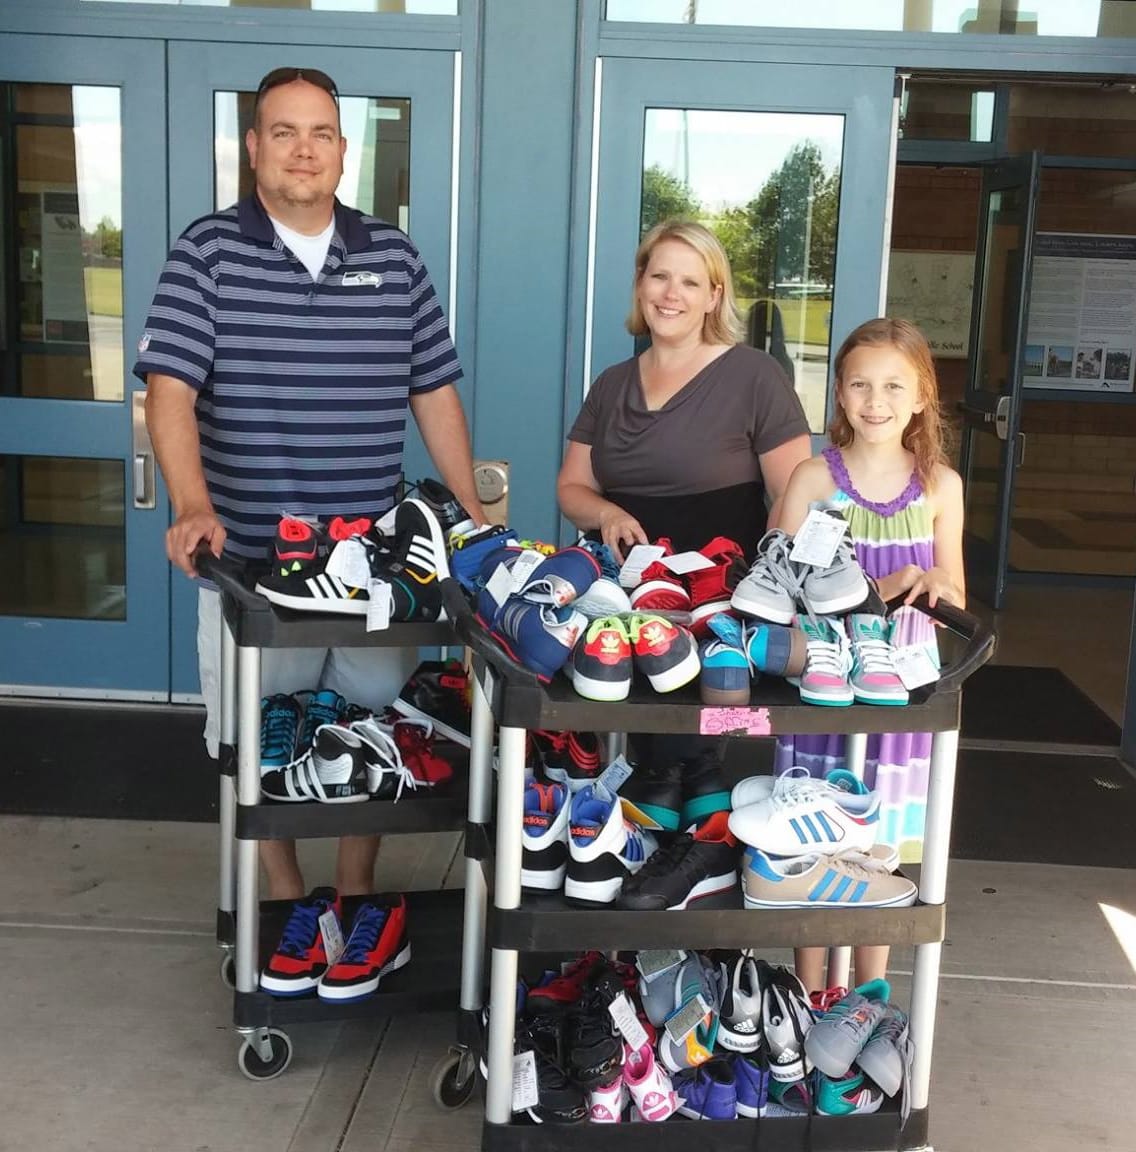 East Vancouver: Shahala Middle School Principal Gregg Brown, from left, staff member Katie Cowles and student Grace Brown with some of the 200-plus pairs of shoes the school&#039;s shoe drive brought in for Share.